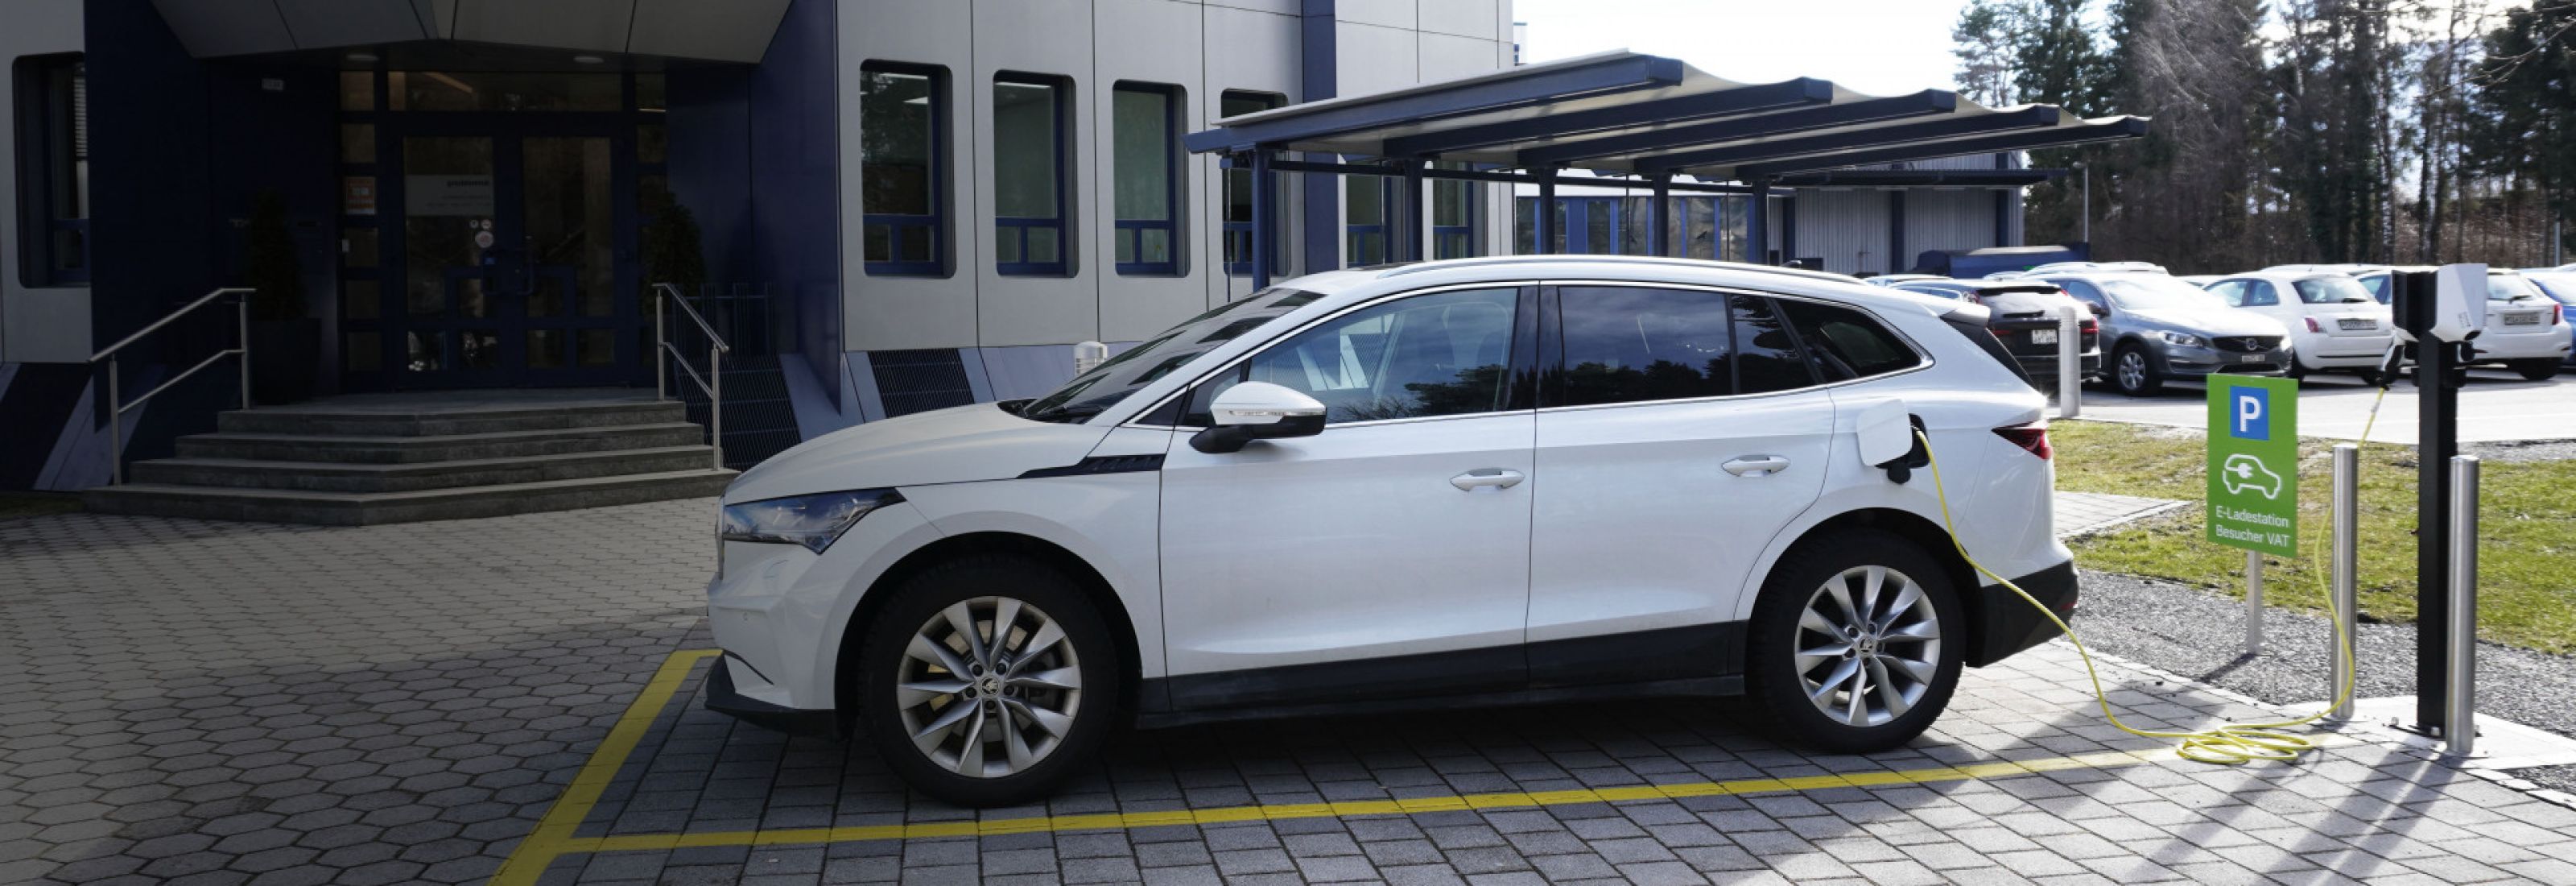 VAT offers Charging Stations for Electric Cars for Employees and